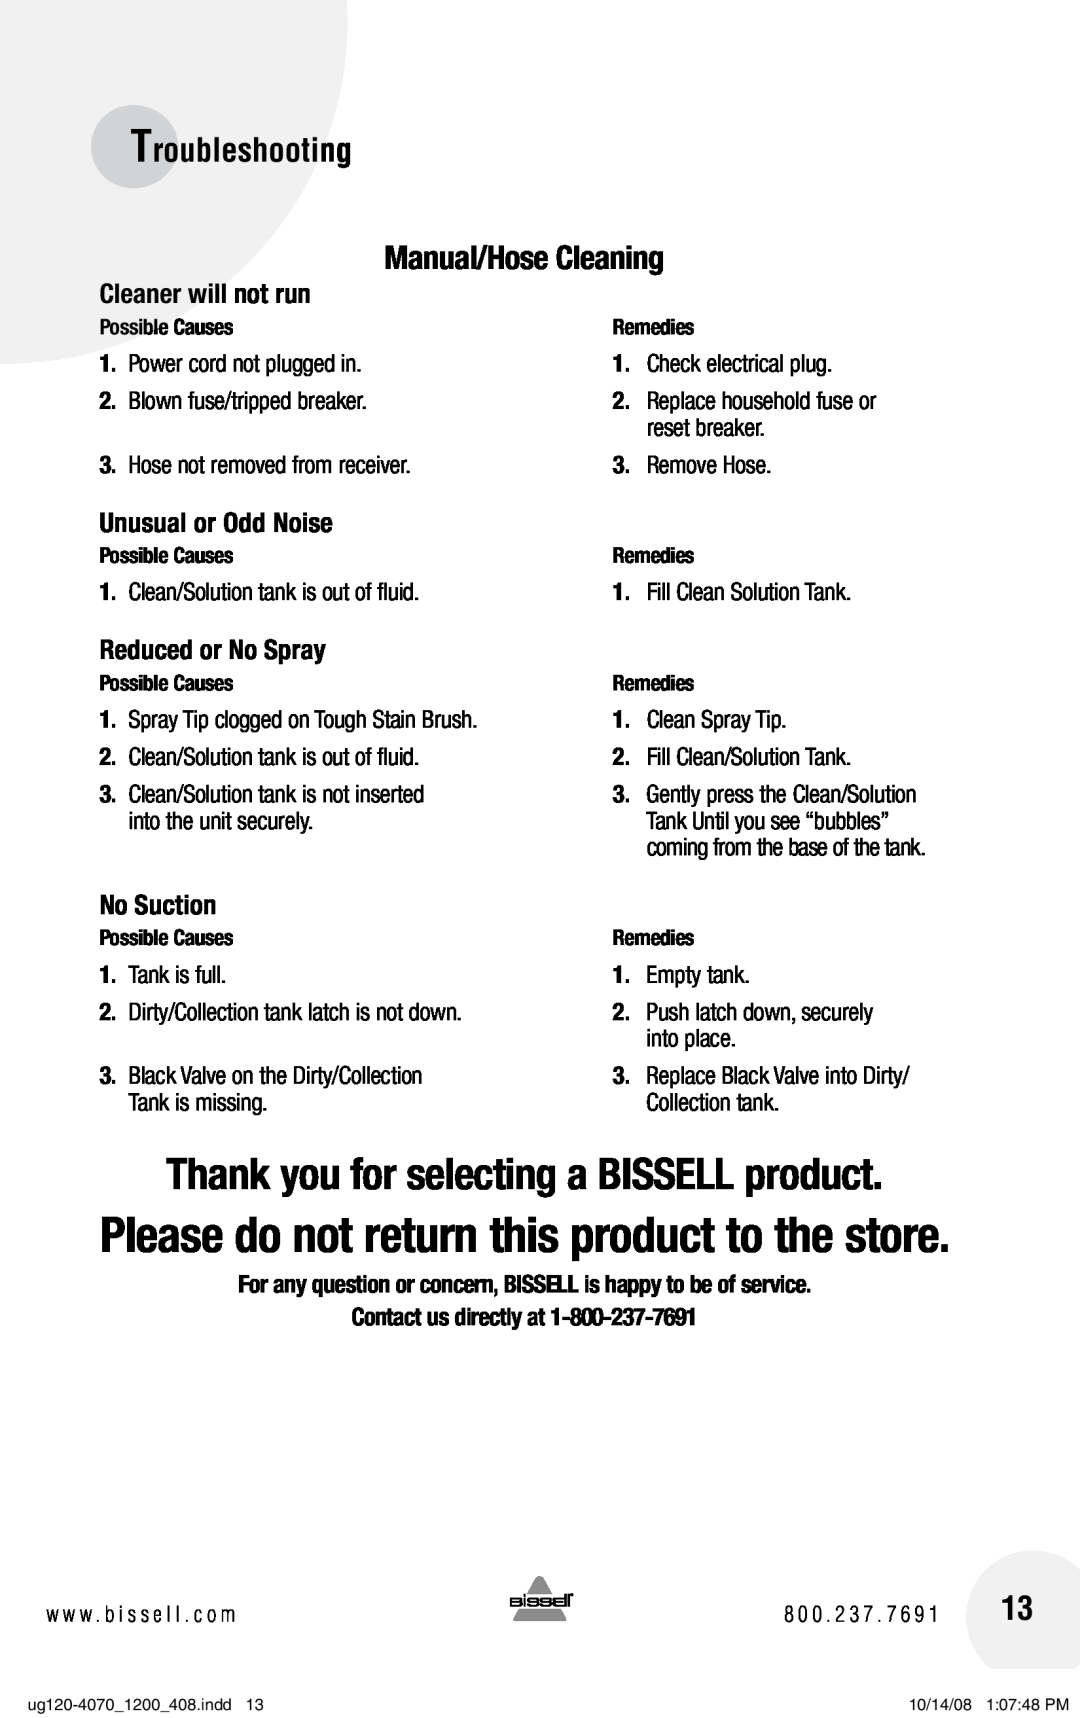 Bissell 1200, 7887 Manual/Hose Cleaning, Please do not return this product to the store, Troubleshooting, No Suction 